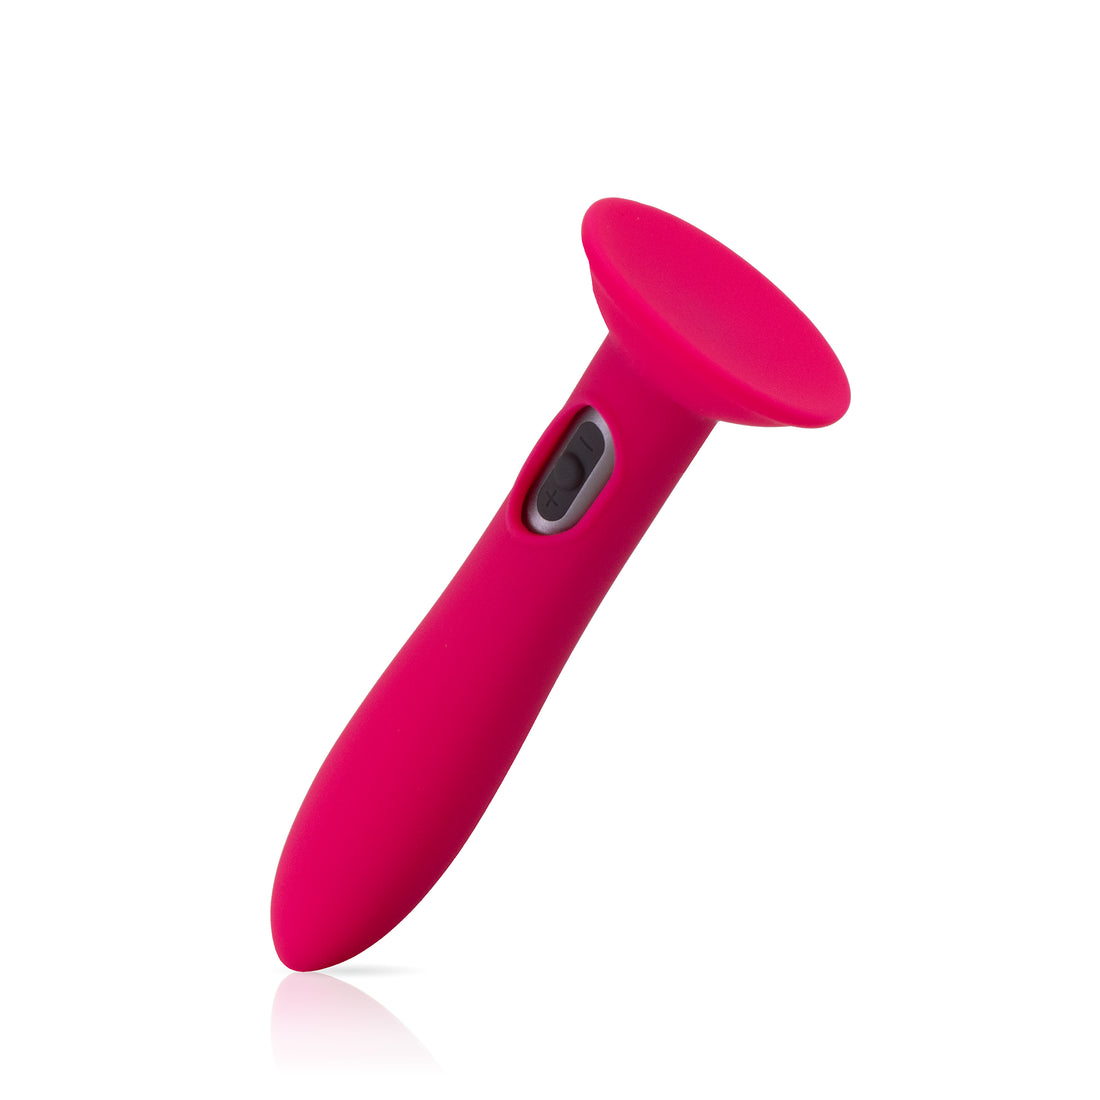 Angle front facing suction cup vibrator sleeve pink with bullet vibrator